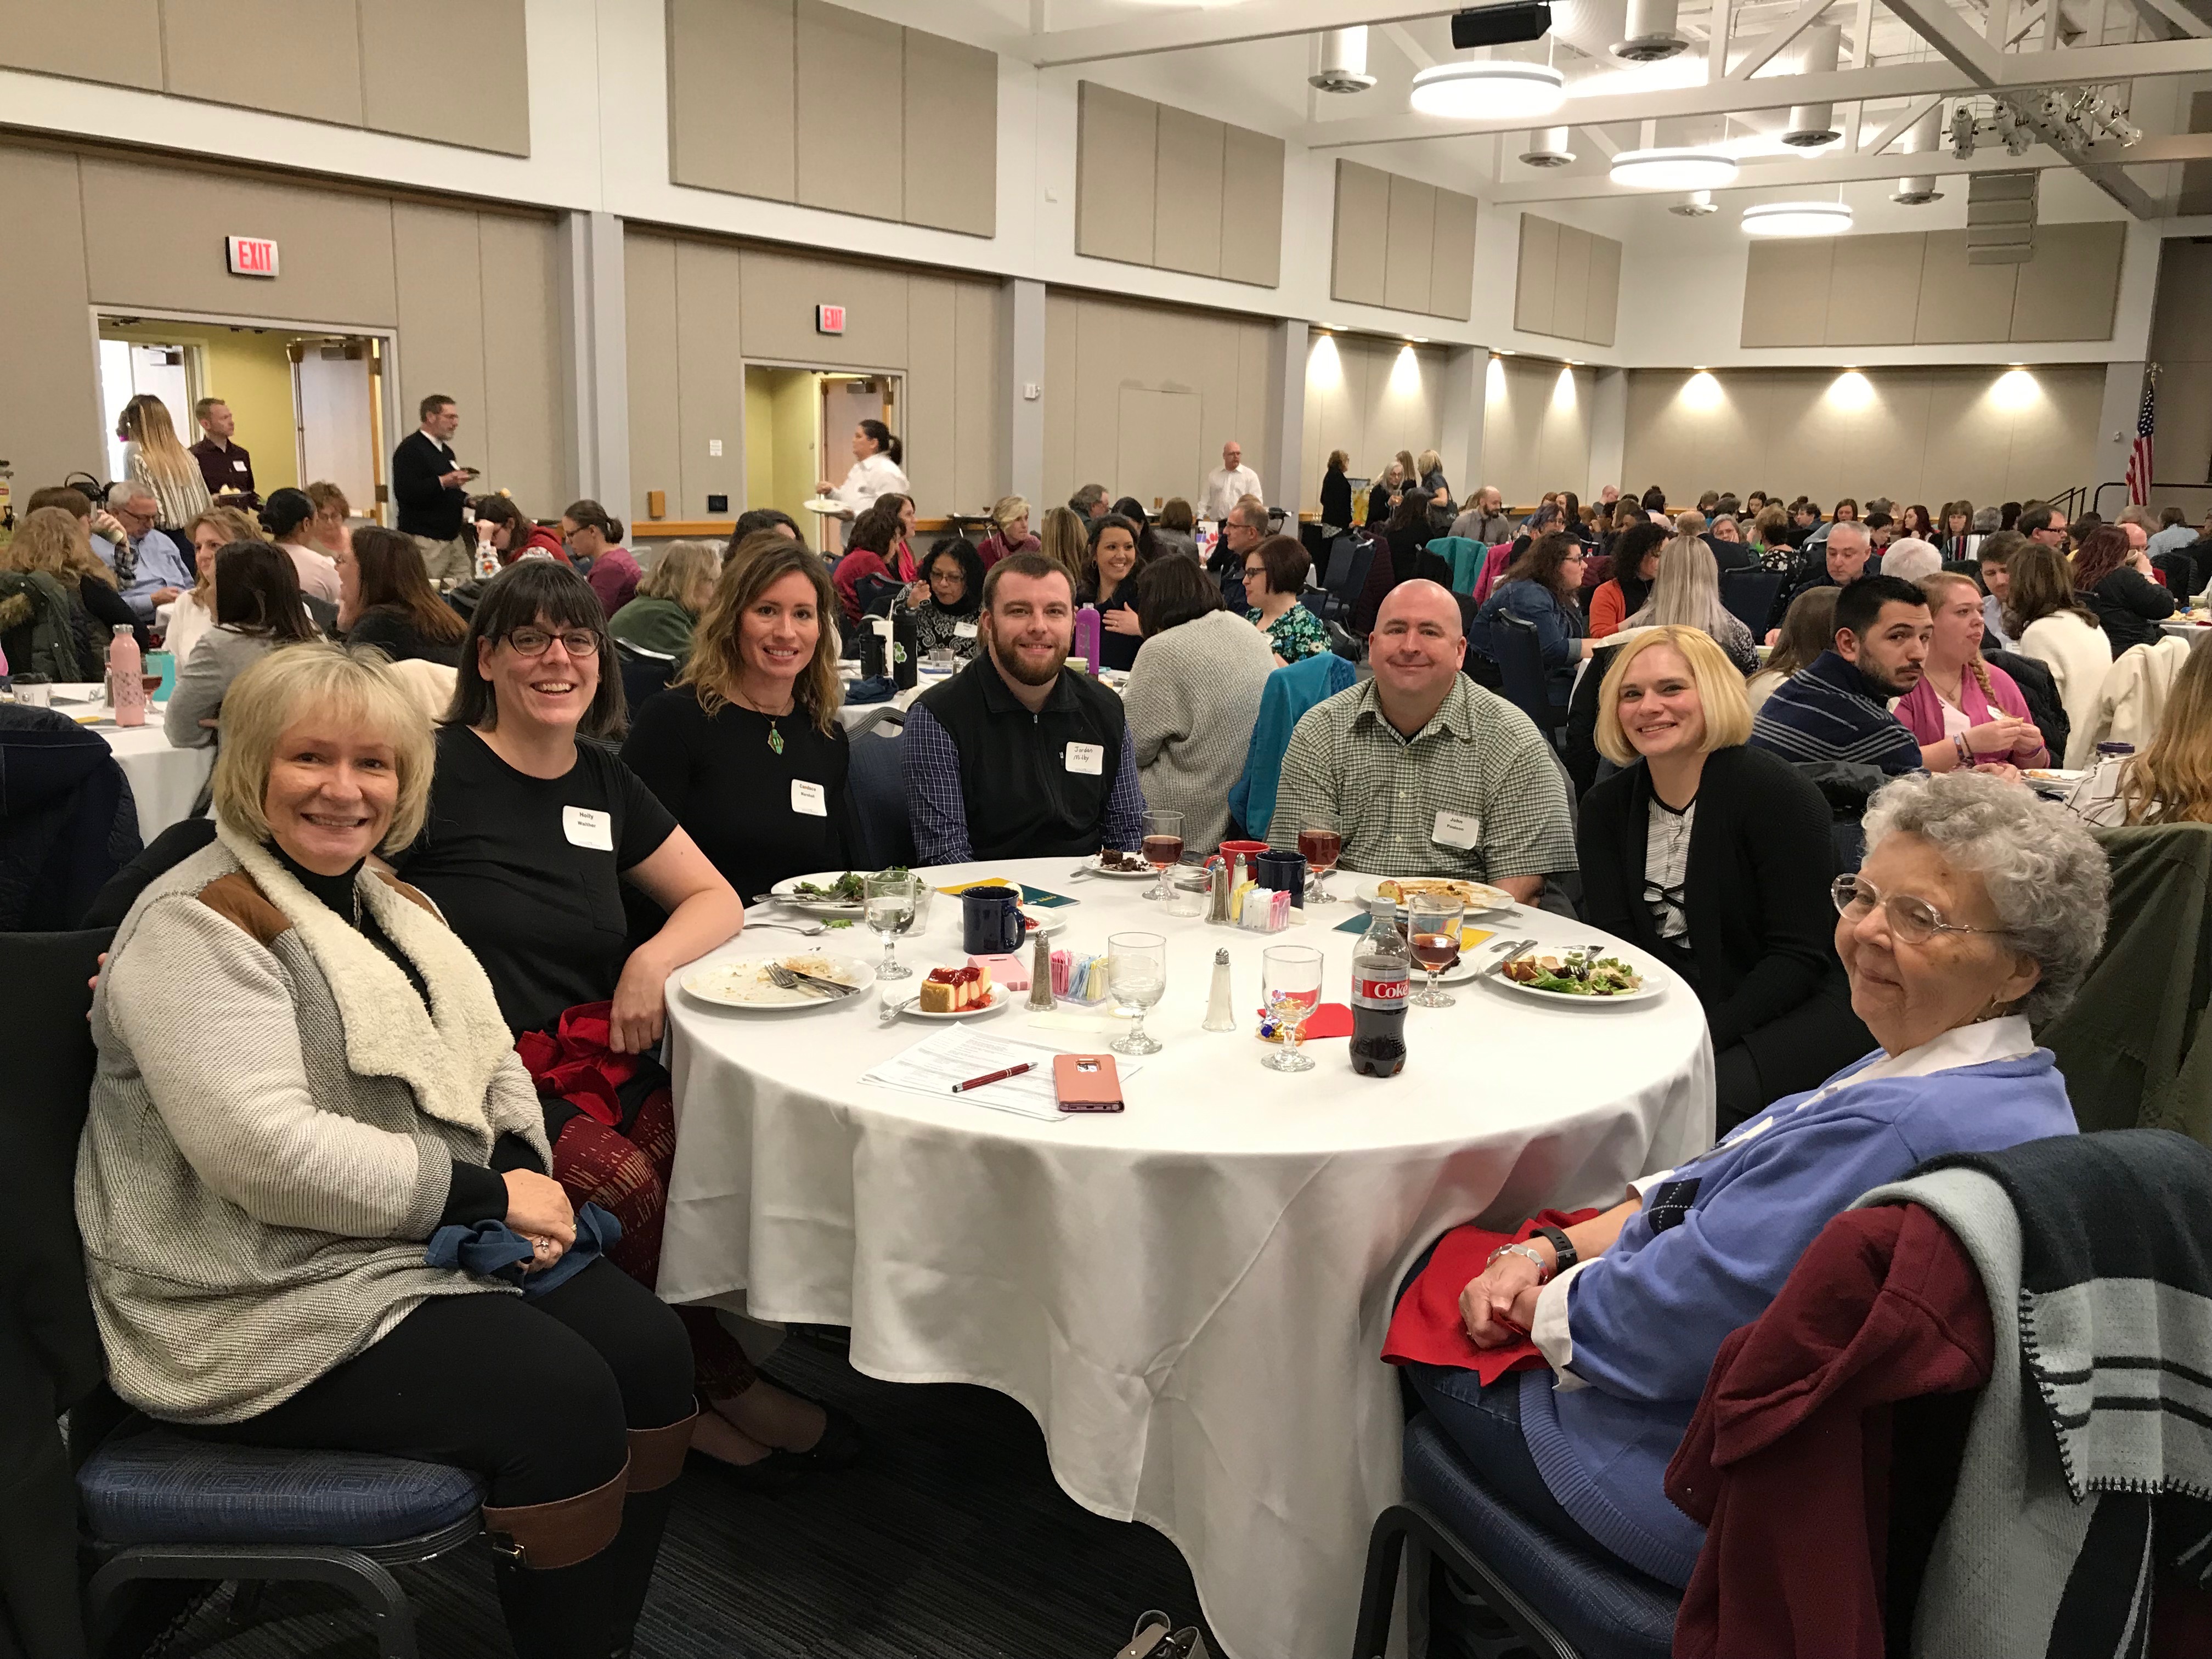 Table of people at the 14th Annual Social Work Conference at USI